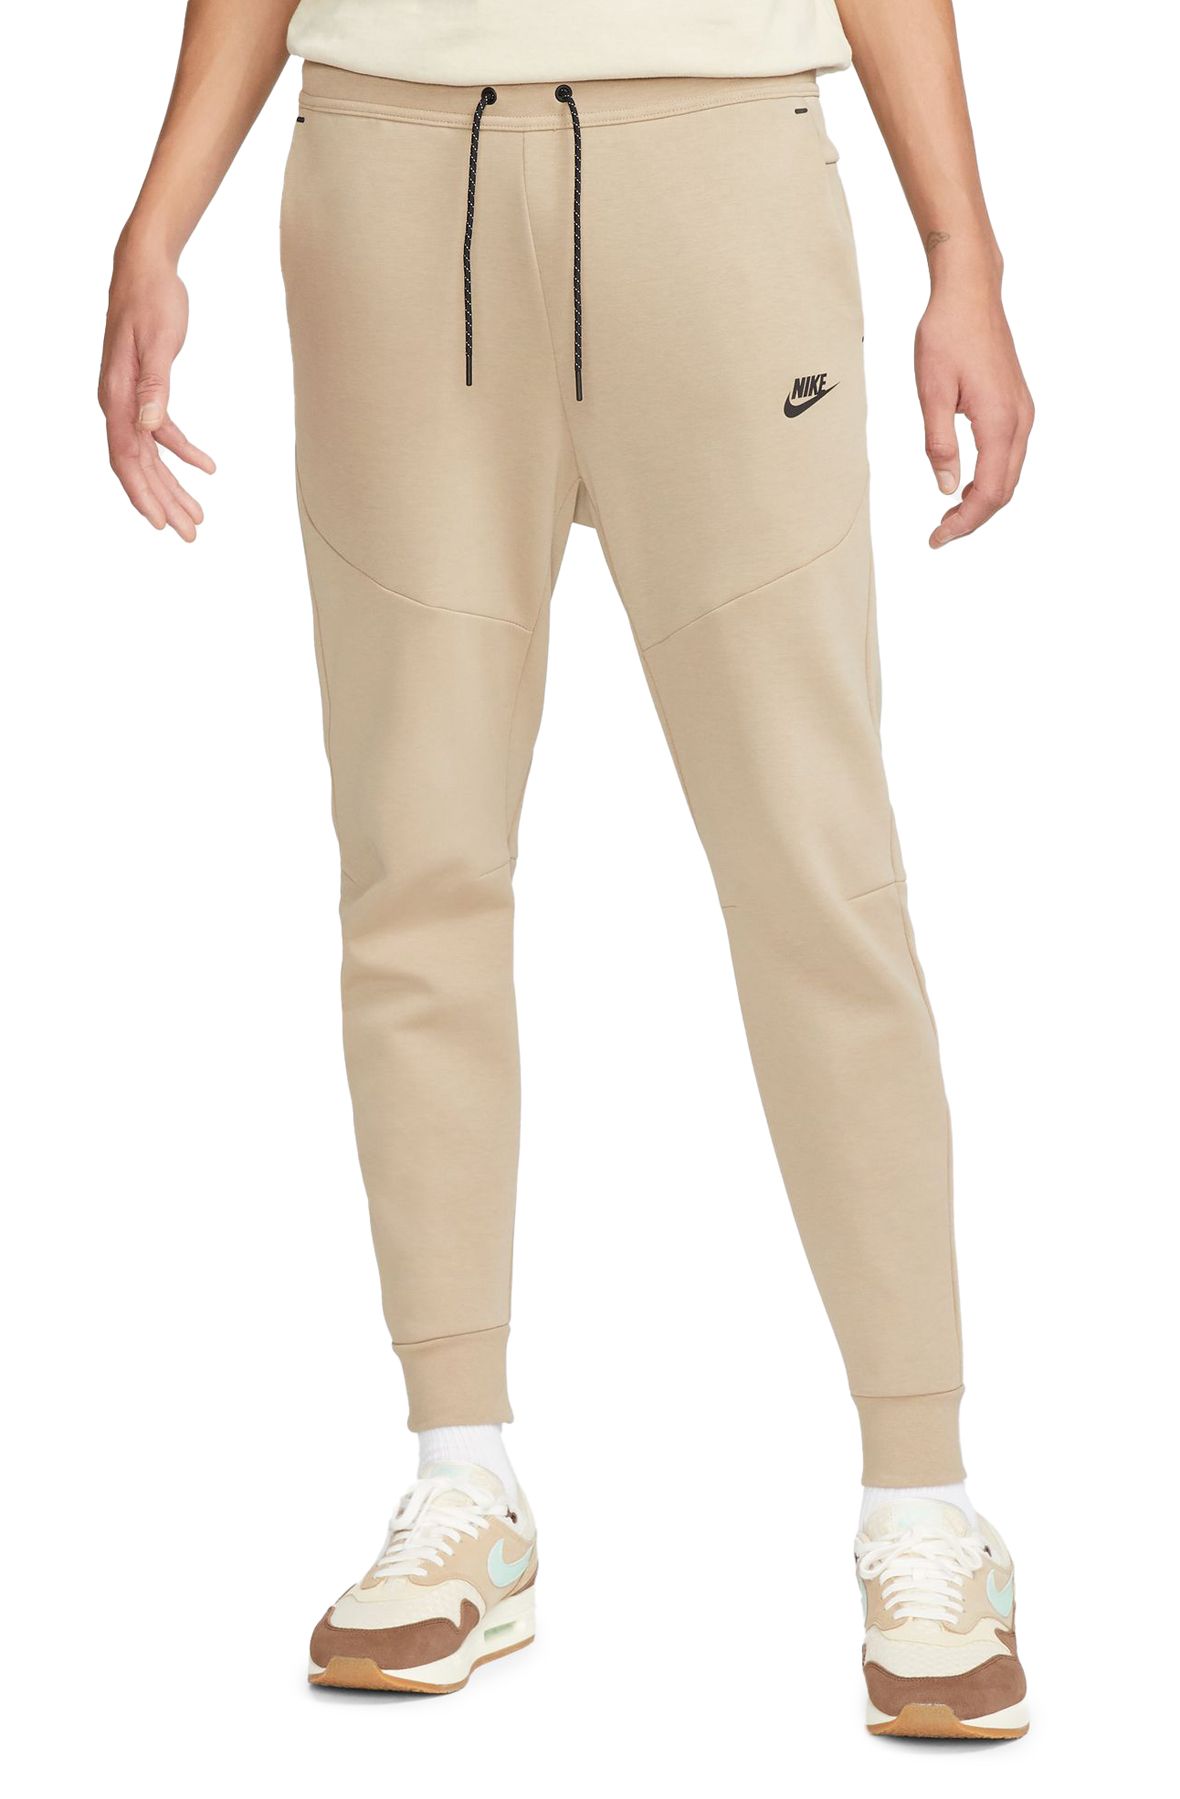 Champion® Tech Weave Jogger - Men's Pants in Camo Smooth Pebble